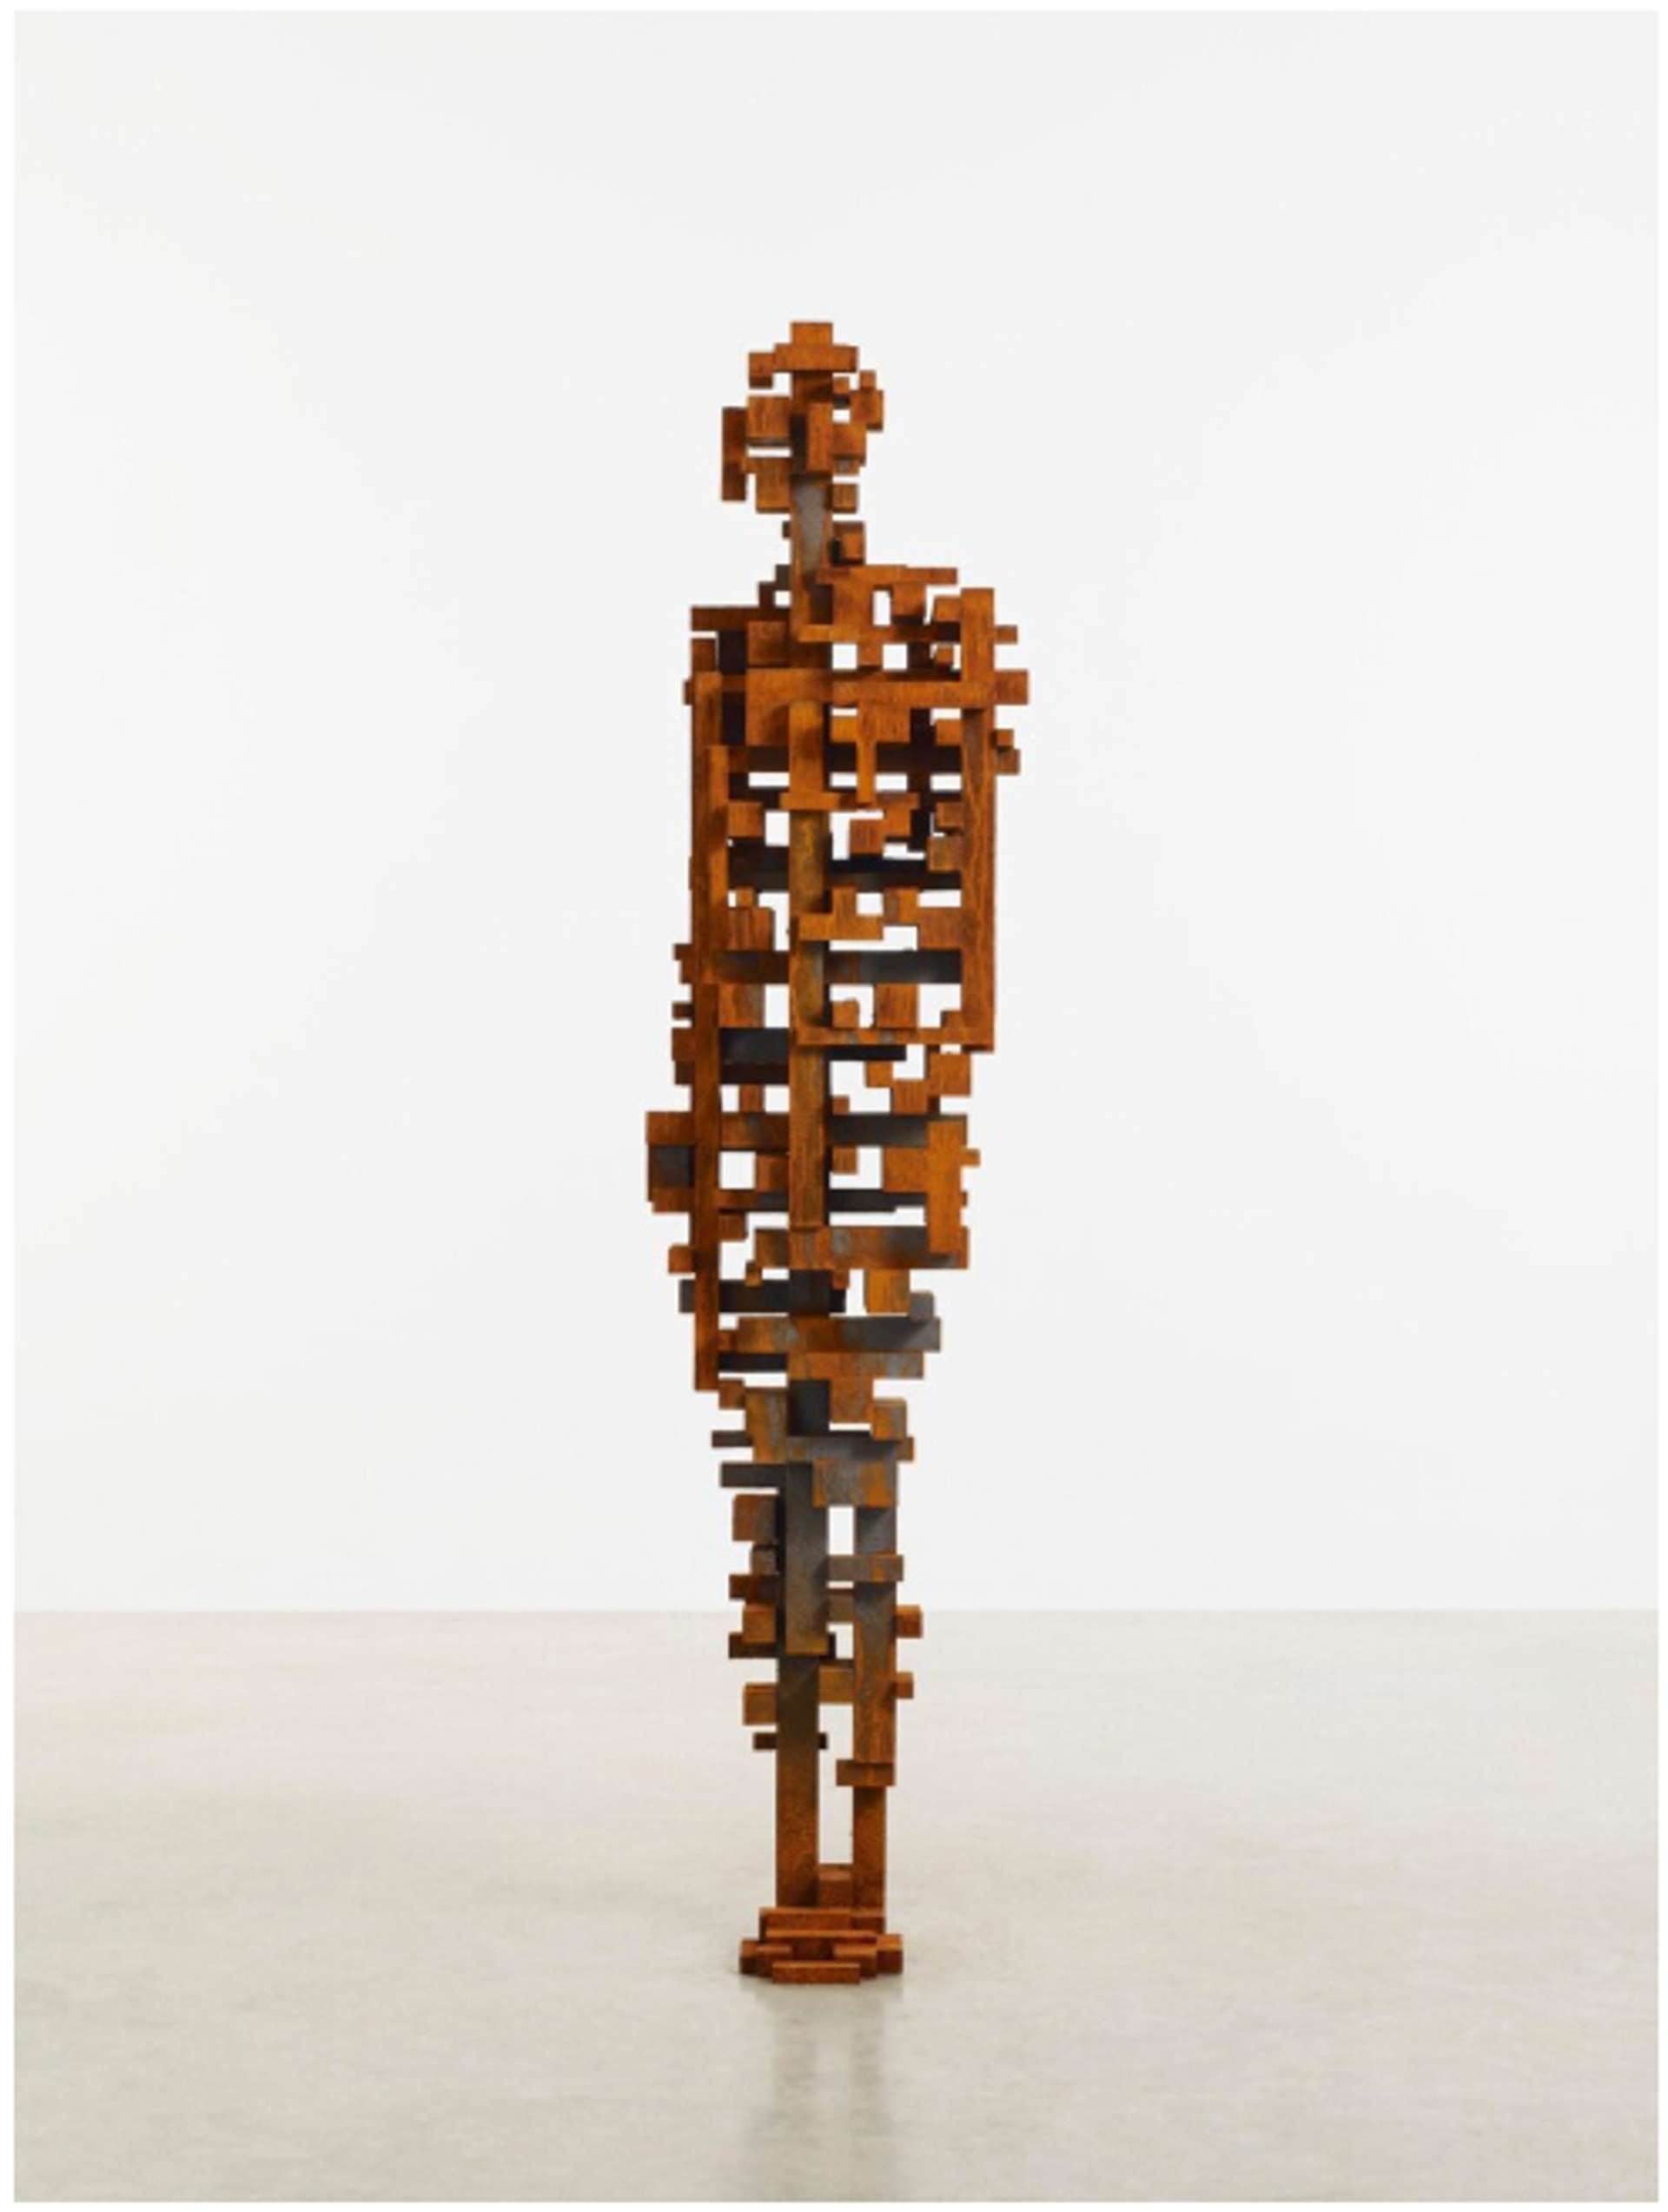 A life-sized sculpture of a human figure, constructed from interlocking steel beams carefully positioned to create voids, showcasing the balance and precision of the artwork. The sculpture captures the essence of the human form, standing upright with feet together and arms at the sides, devoid of specific features. The photograph captures the sculpture in an empty white gallery space.